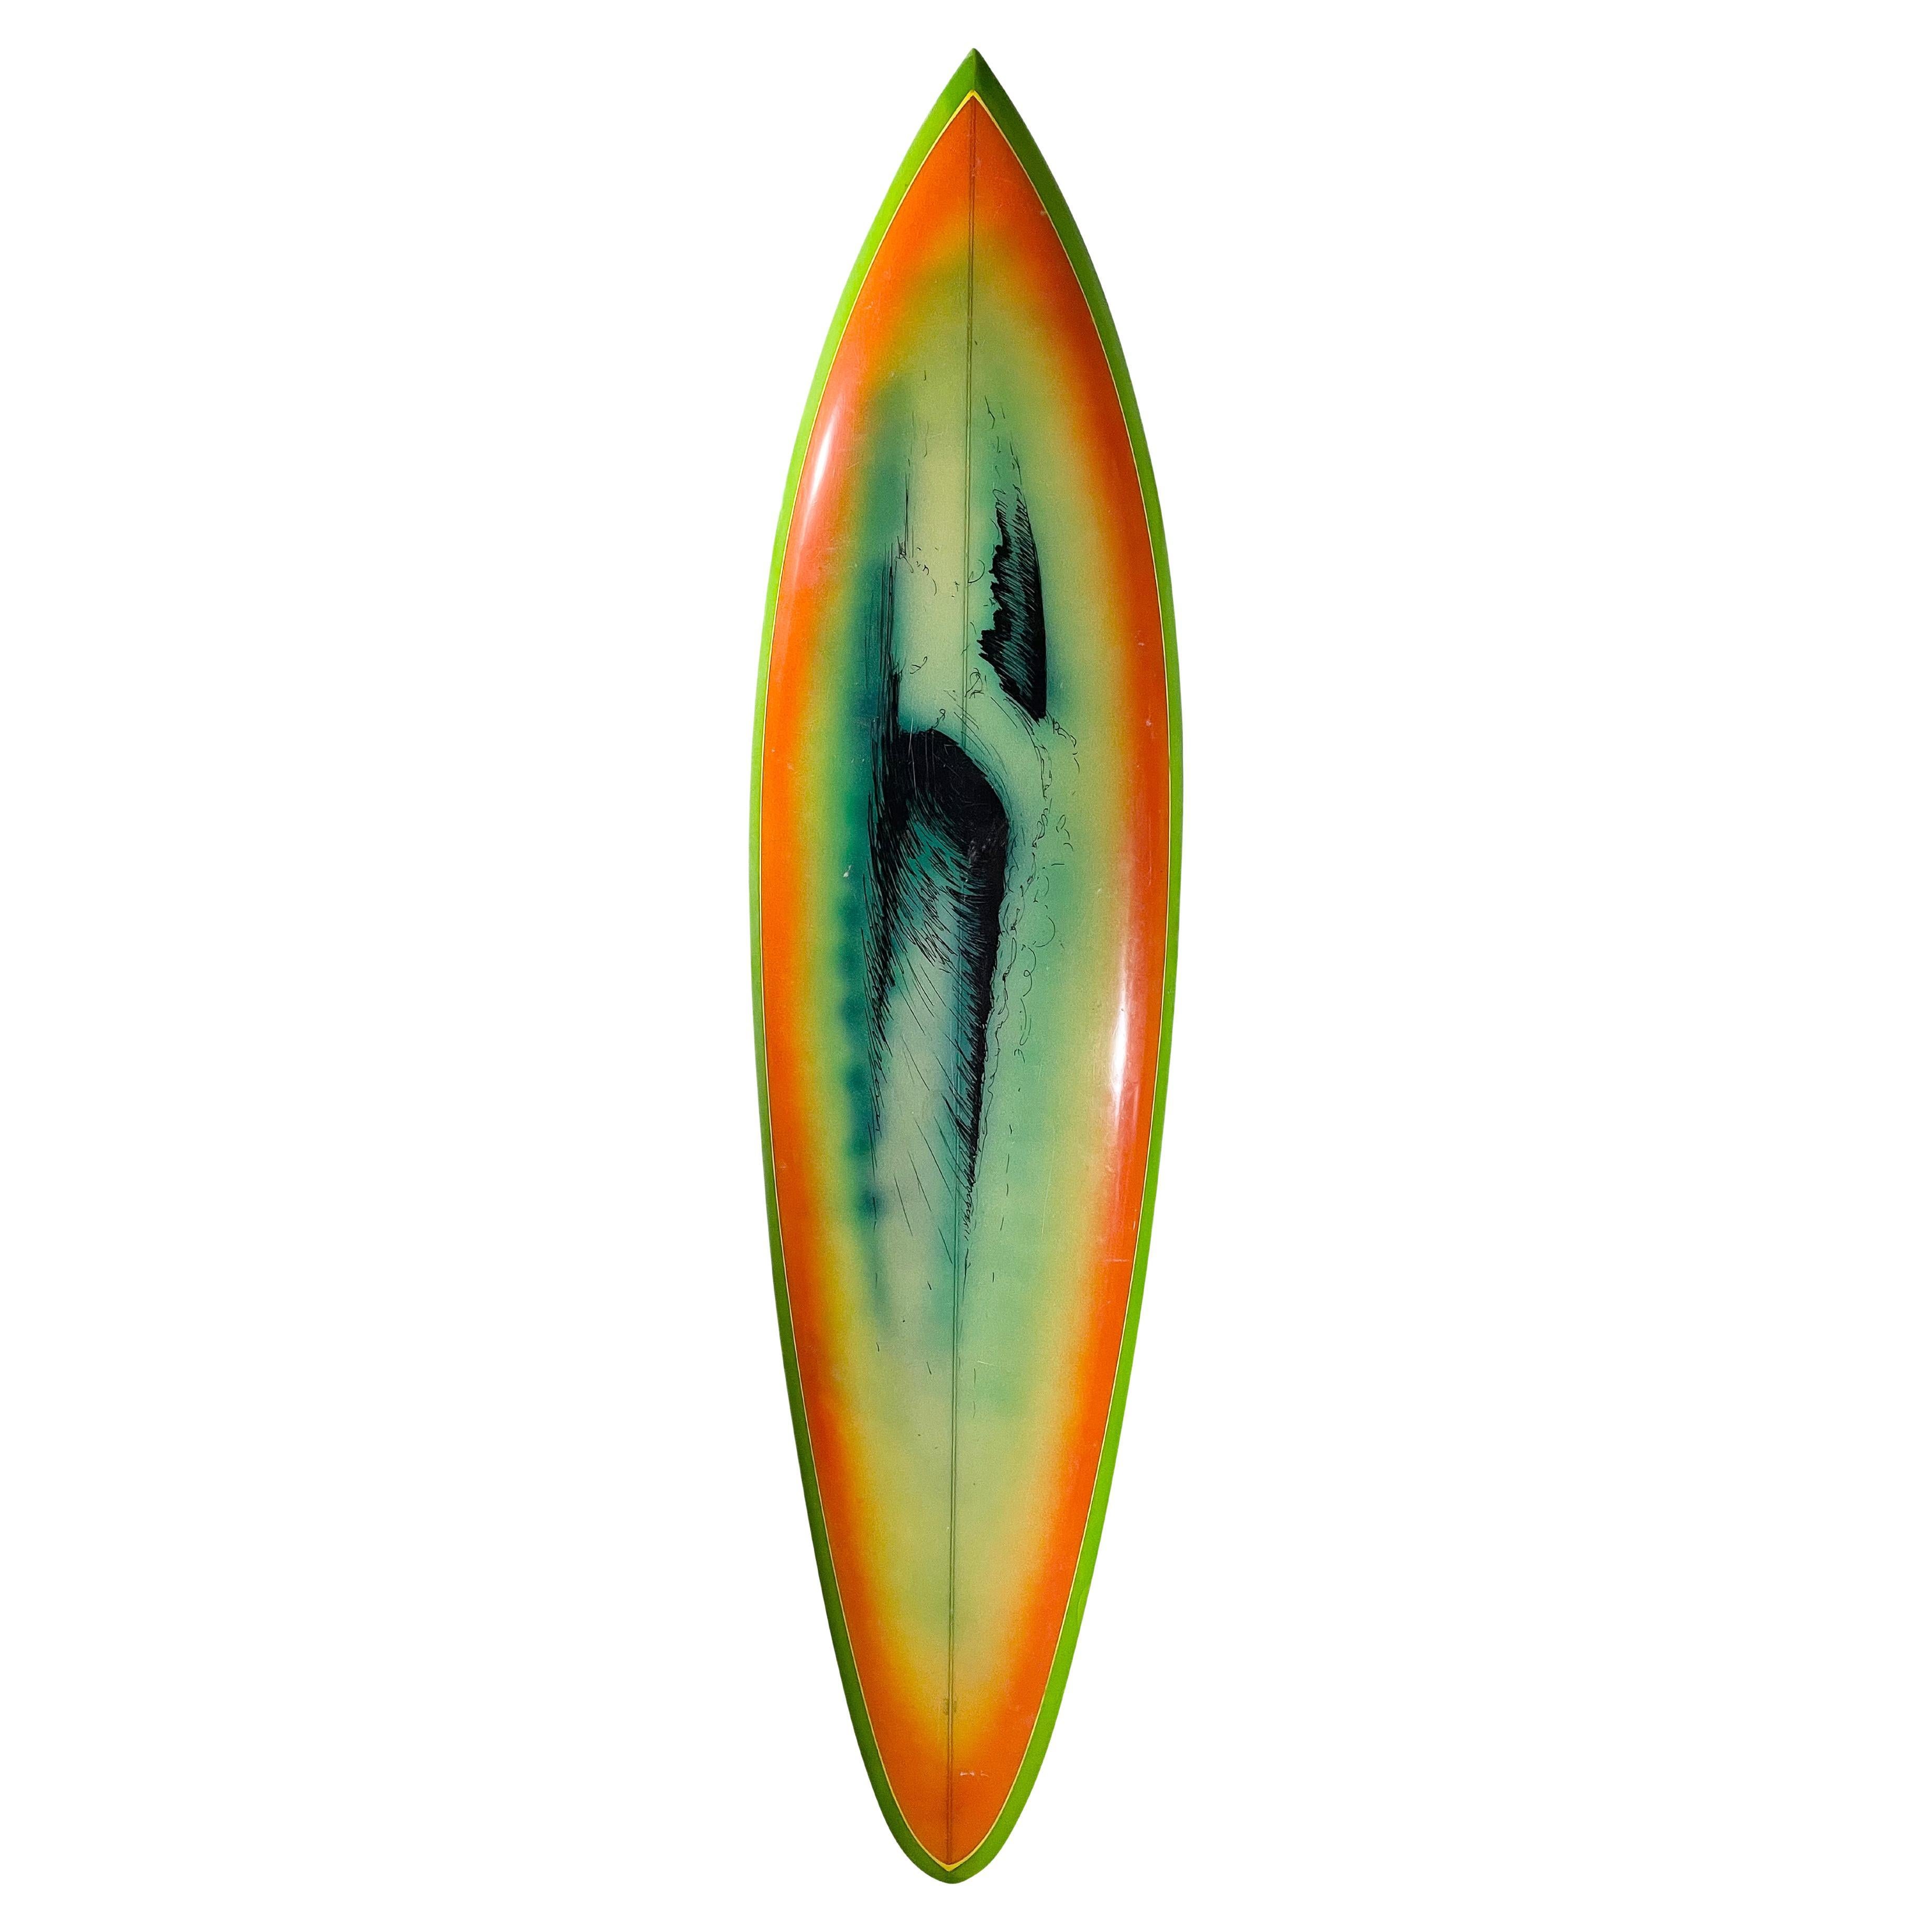 1970s Vintage Ocean Crystal Wave Mural Surfboard Shaped by Clyde Beatty Jr. For Sale